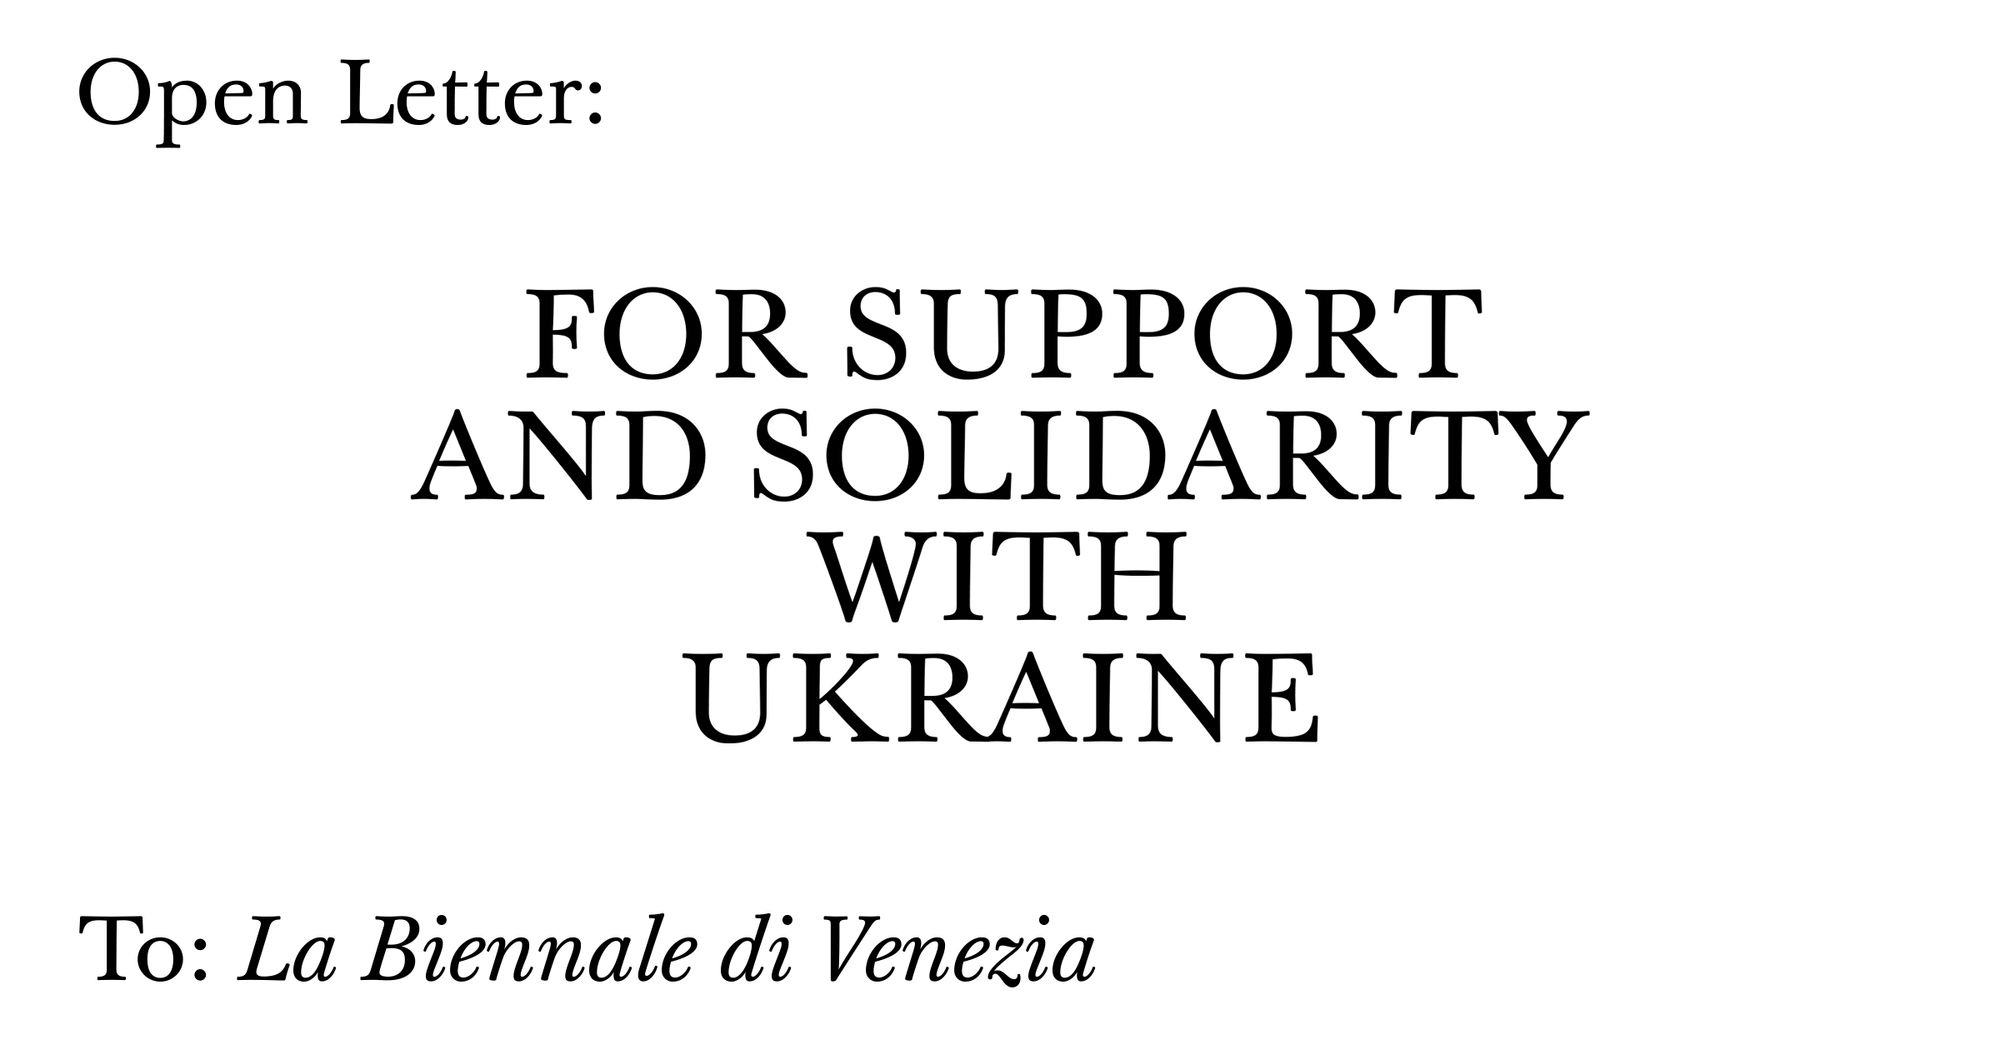 Open letter: FOR SUPPORT AND SOLIDARITY WITH UKRAINE